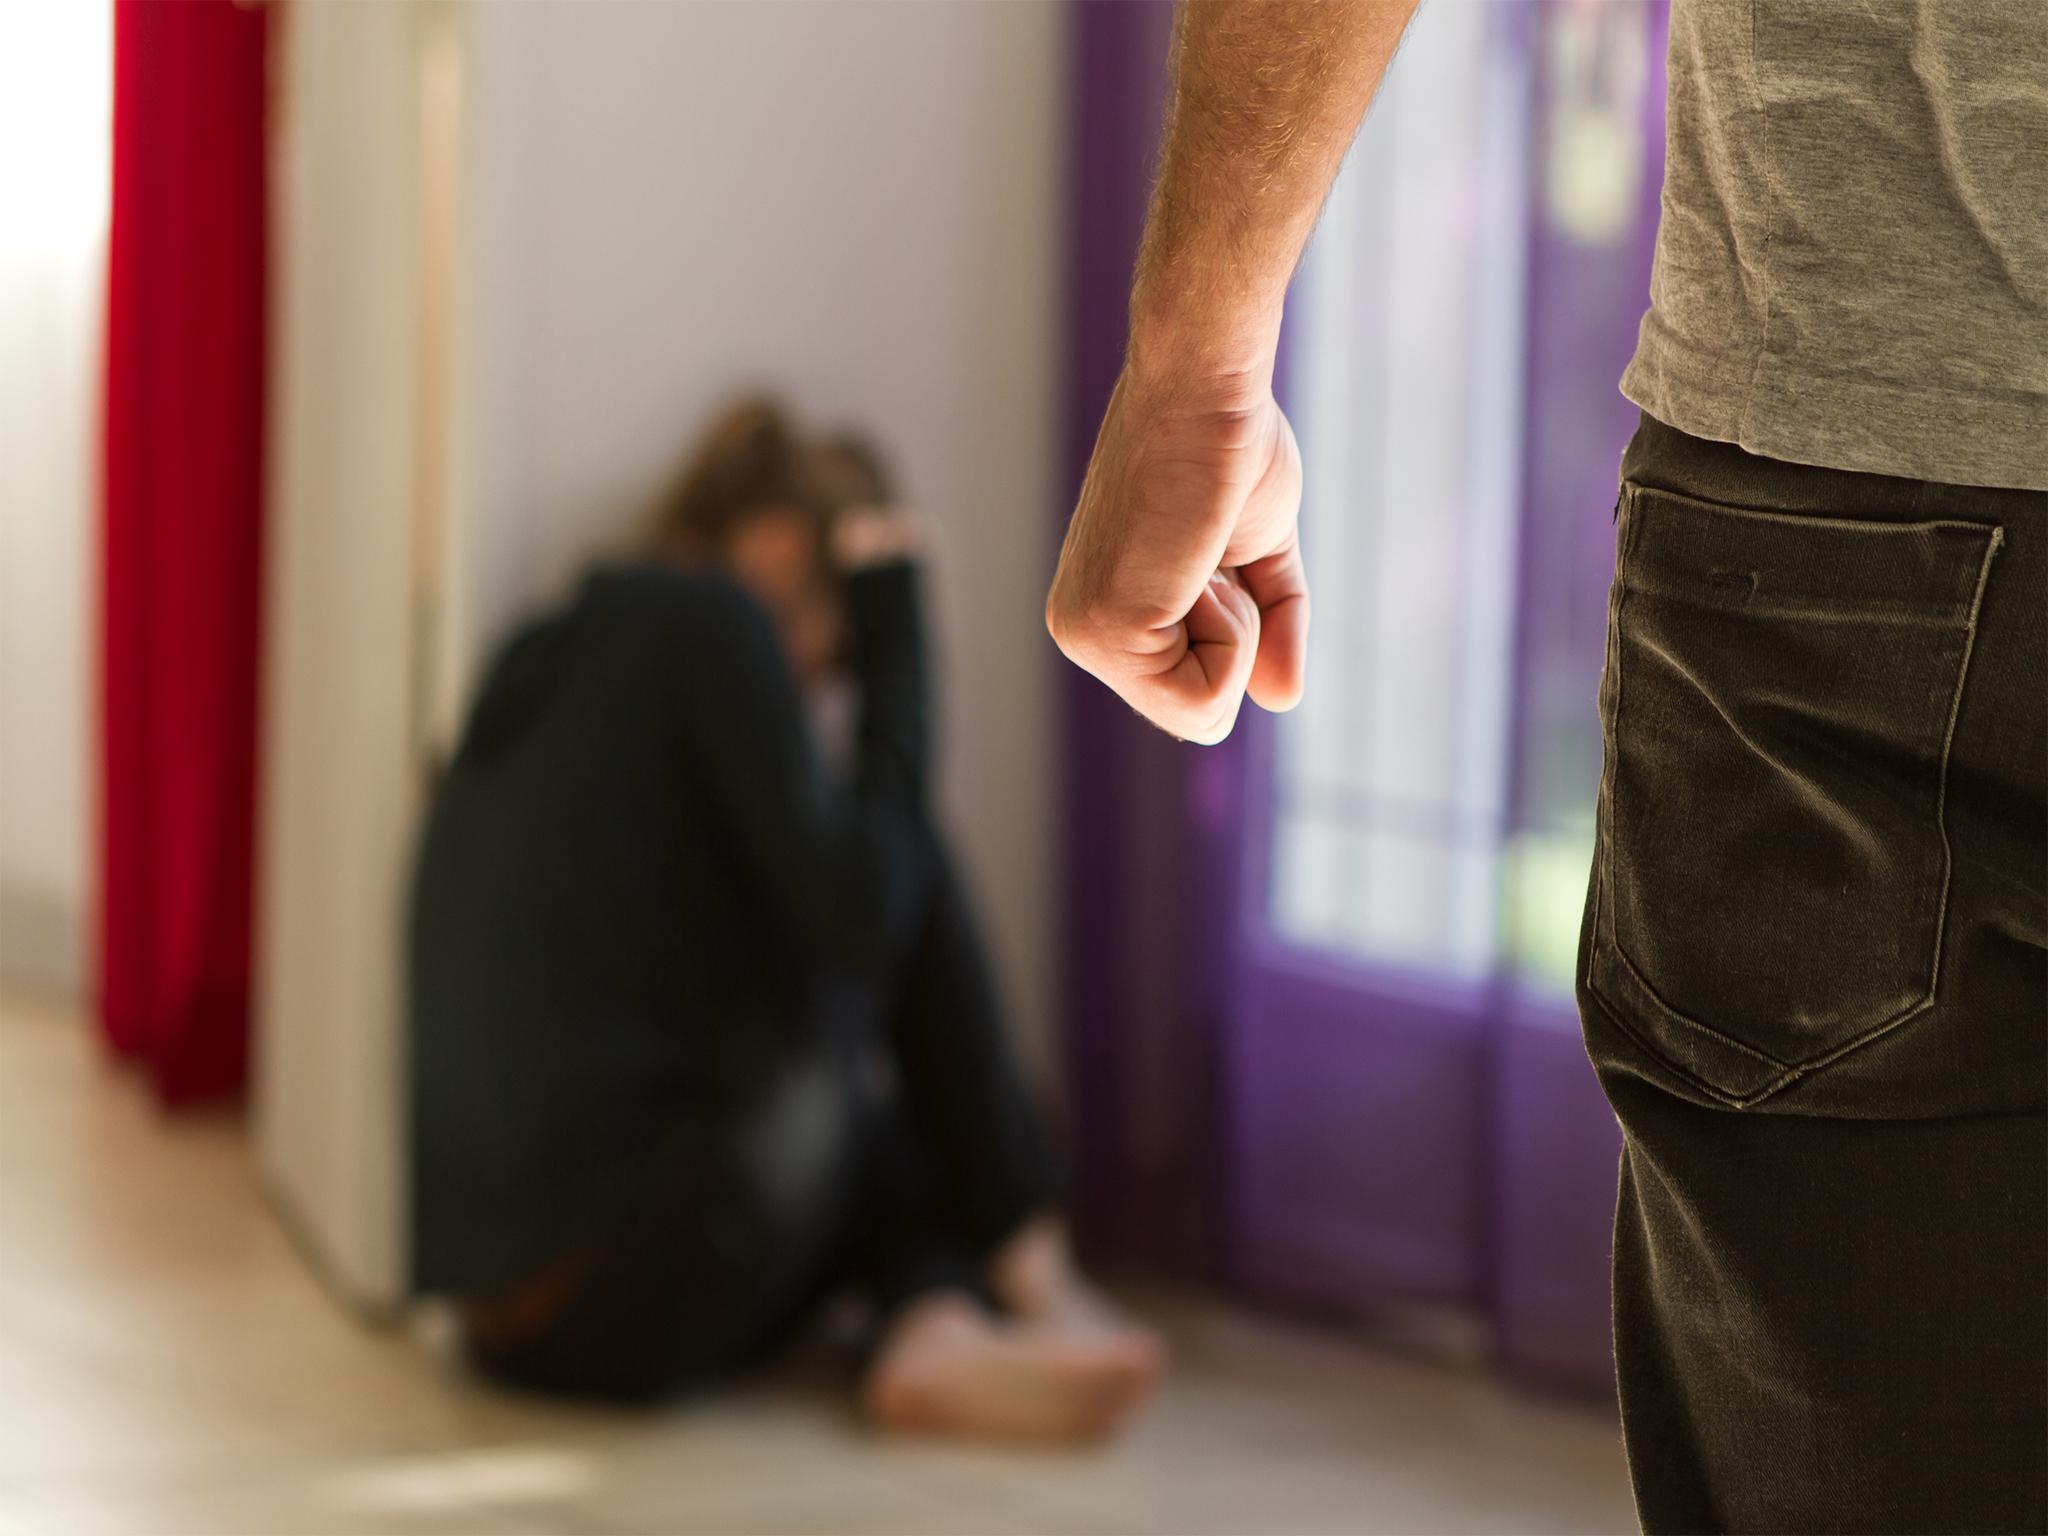 Women's Aid criticises the government for only introducing so-called special measures to protect domestic violence victims in criminal courts but failing to do the same in family courts